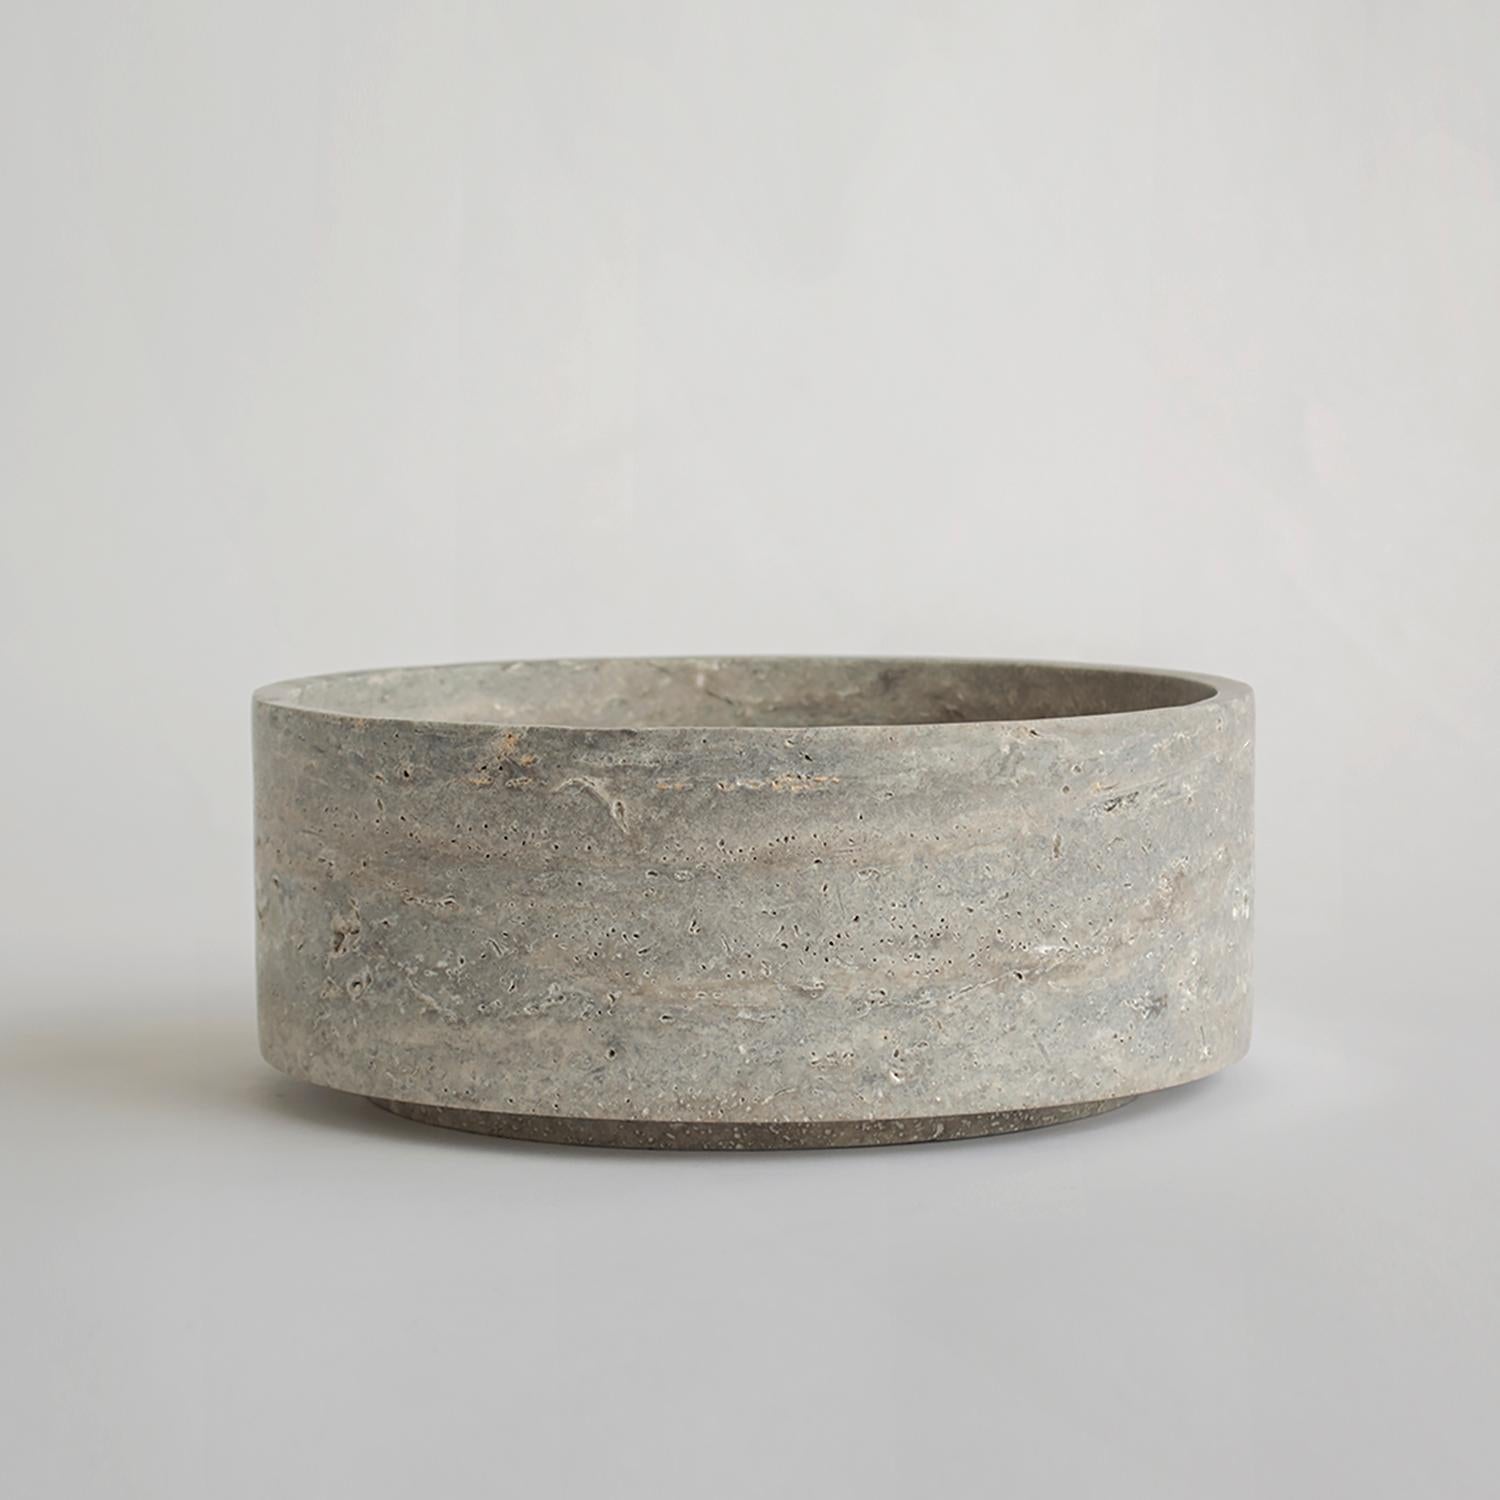 This substantial silver travertine bowl is beautifully handcrafted from a single piece of genuine travertine and honed for a silky mat finish. Expertly crafted and finished by hand, our travertine bowls are a study in sculptural simplicity.